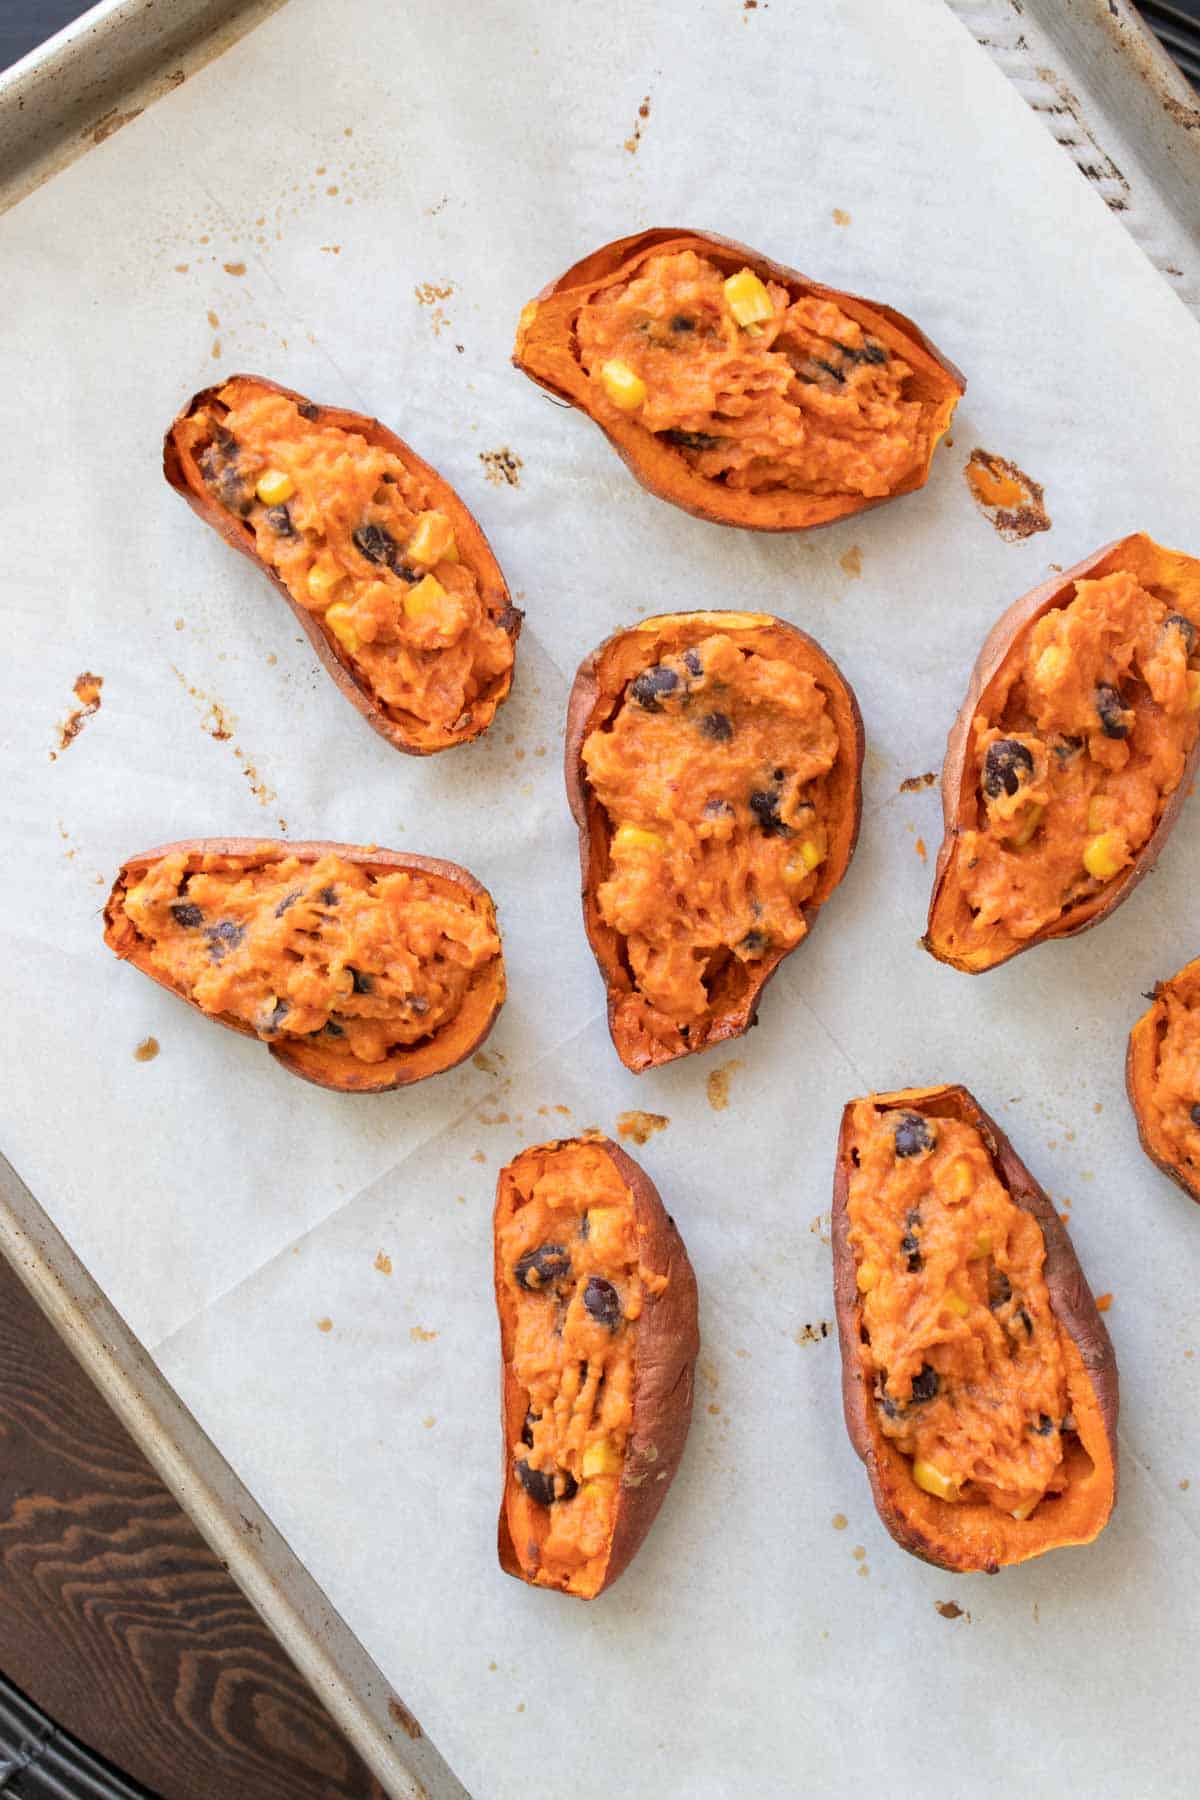 Top view of baked sweet potato skins filled with mashed potato mixture